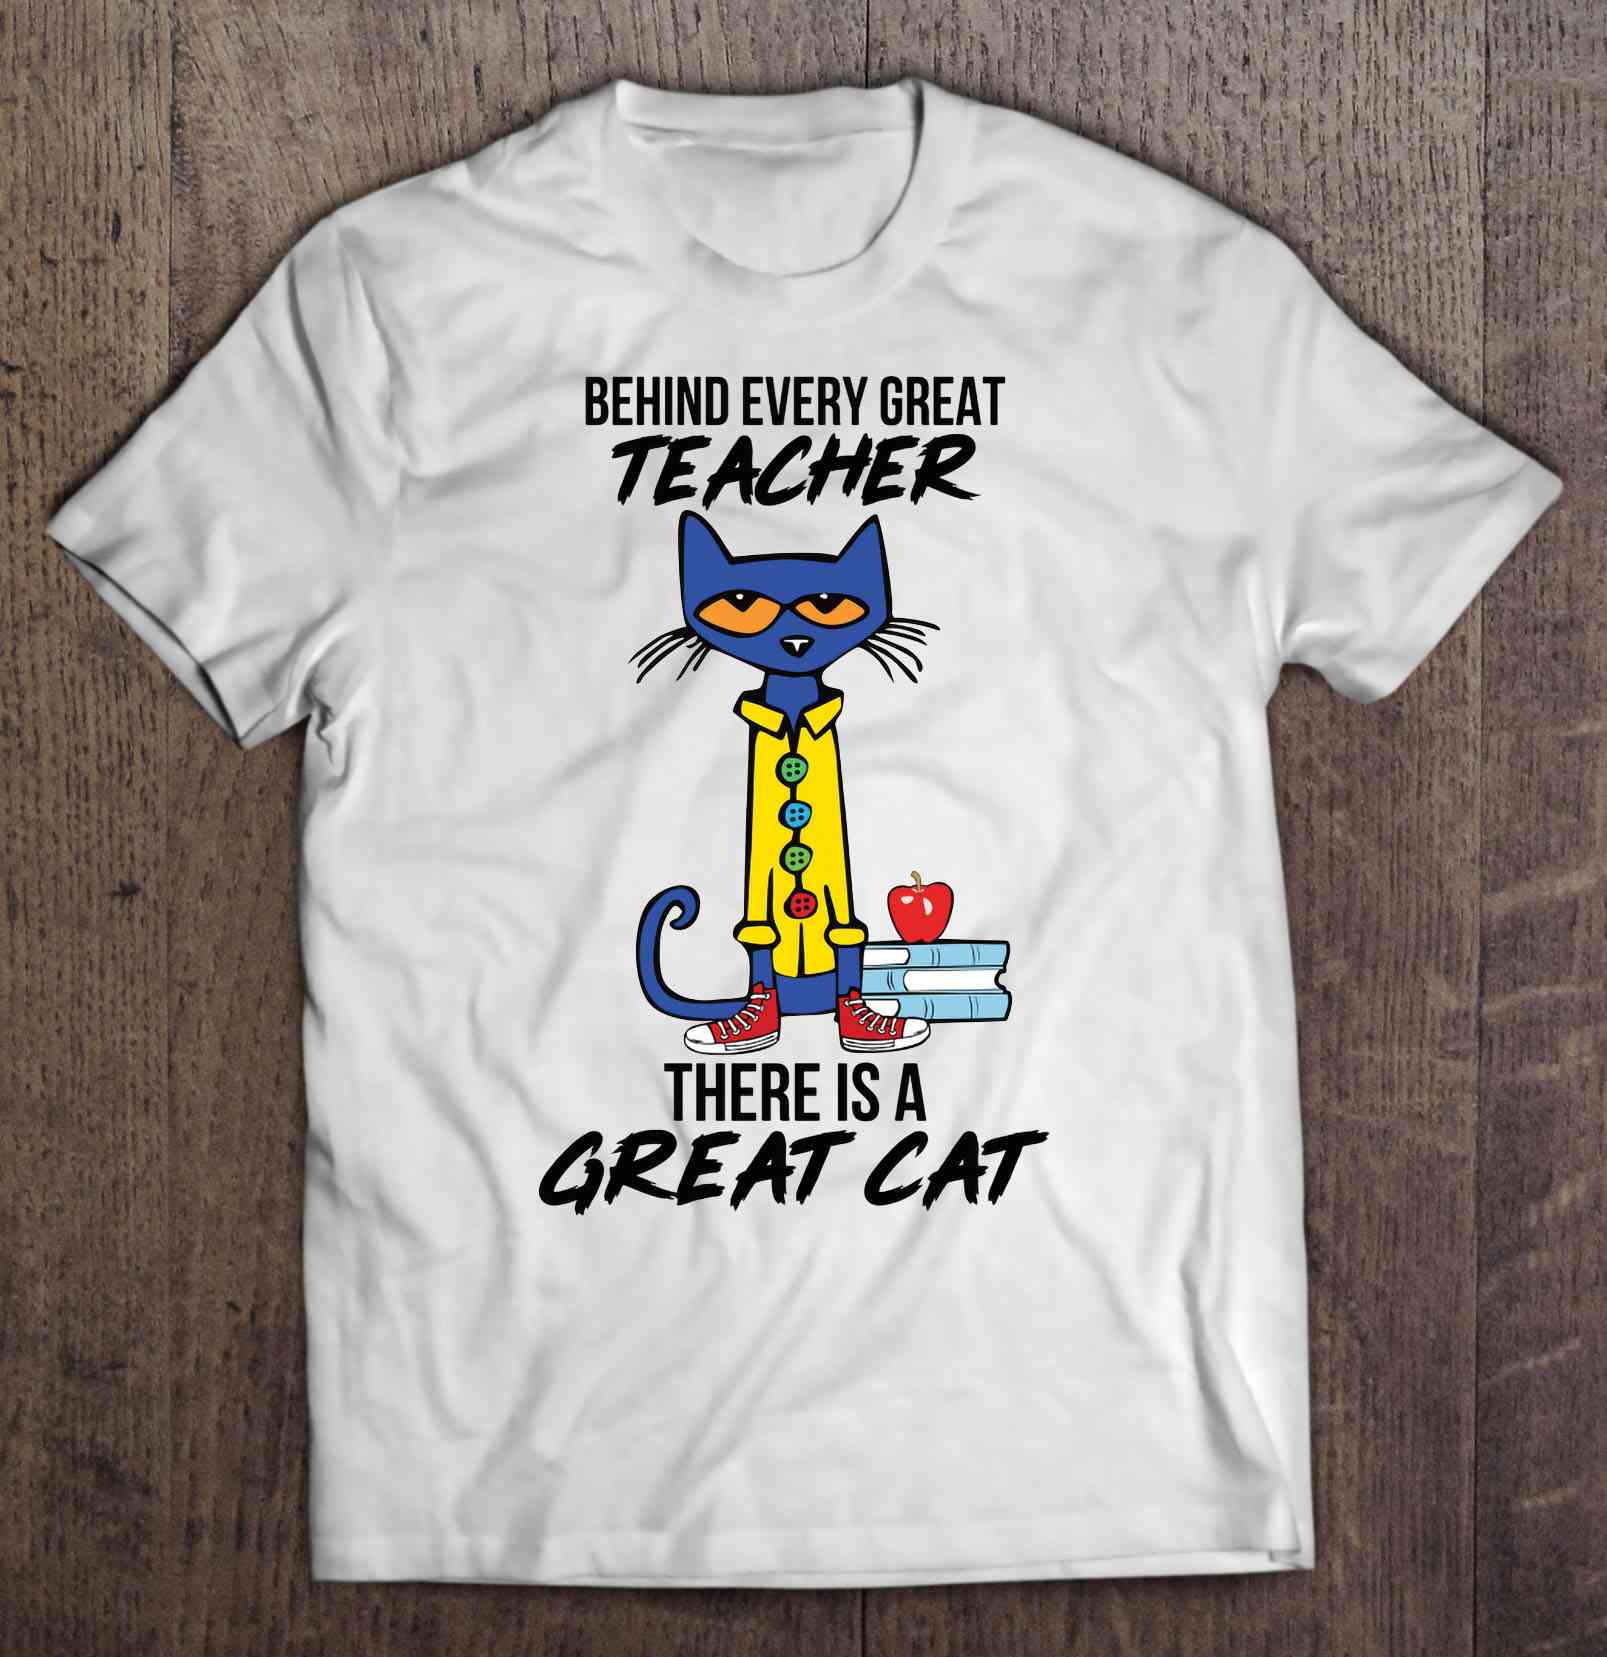 Behind Every Great Teacher There Is A Great Cat Pete The Cat Version Shirt, Teacher Gift, Pete The Cat Shirt